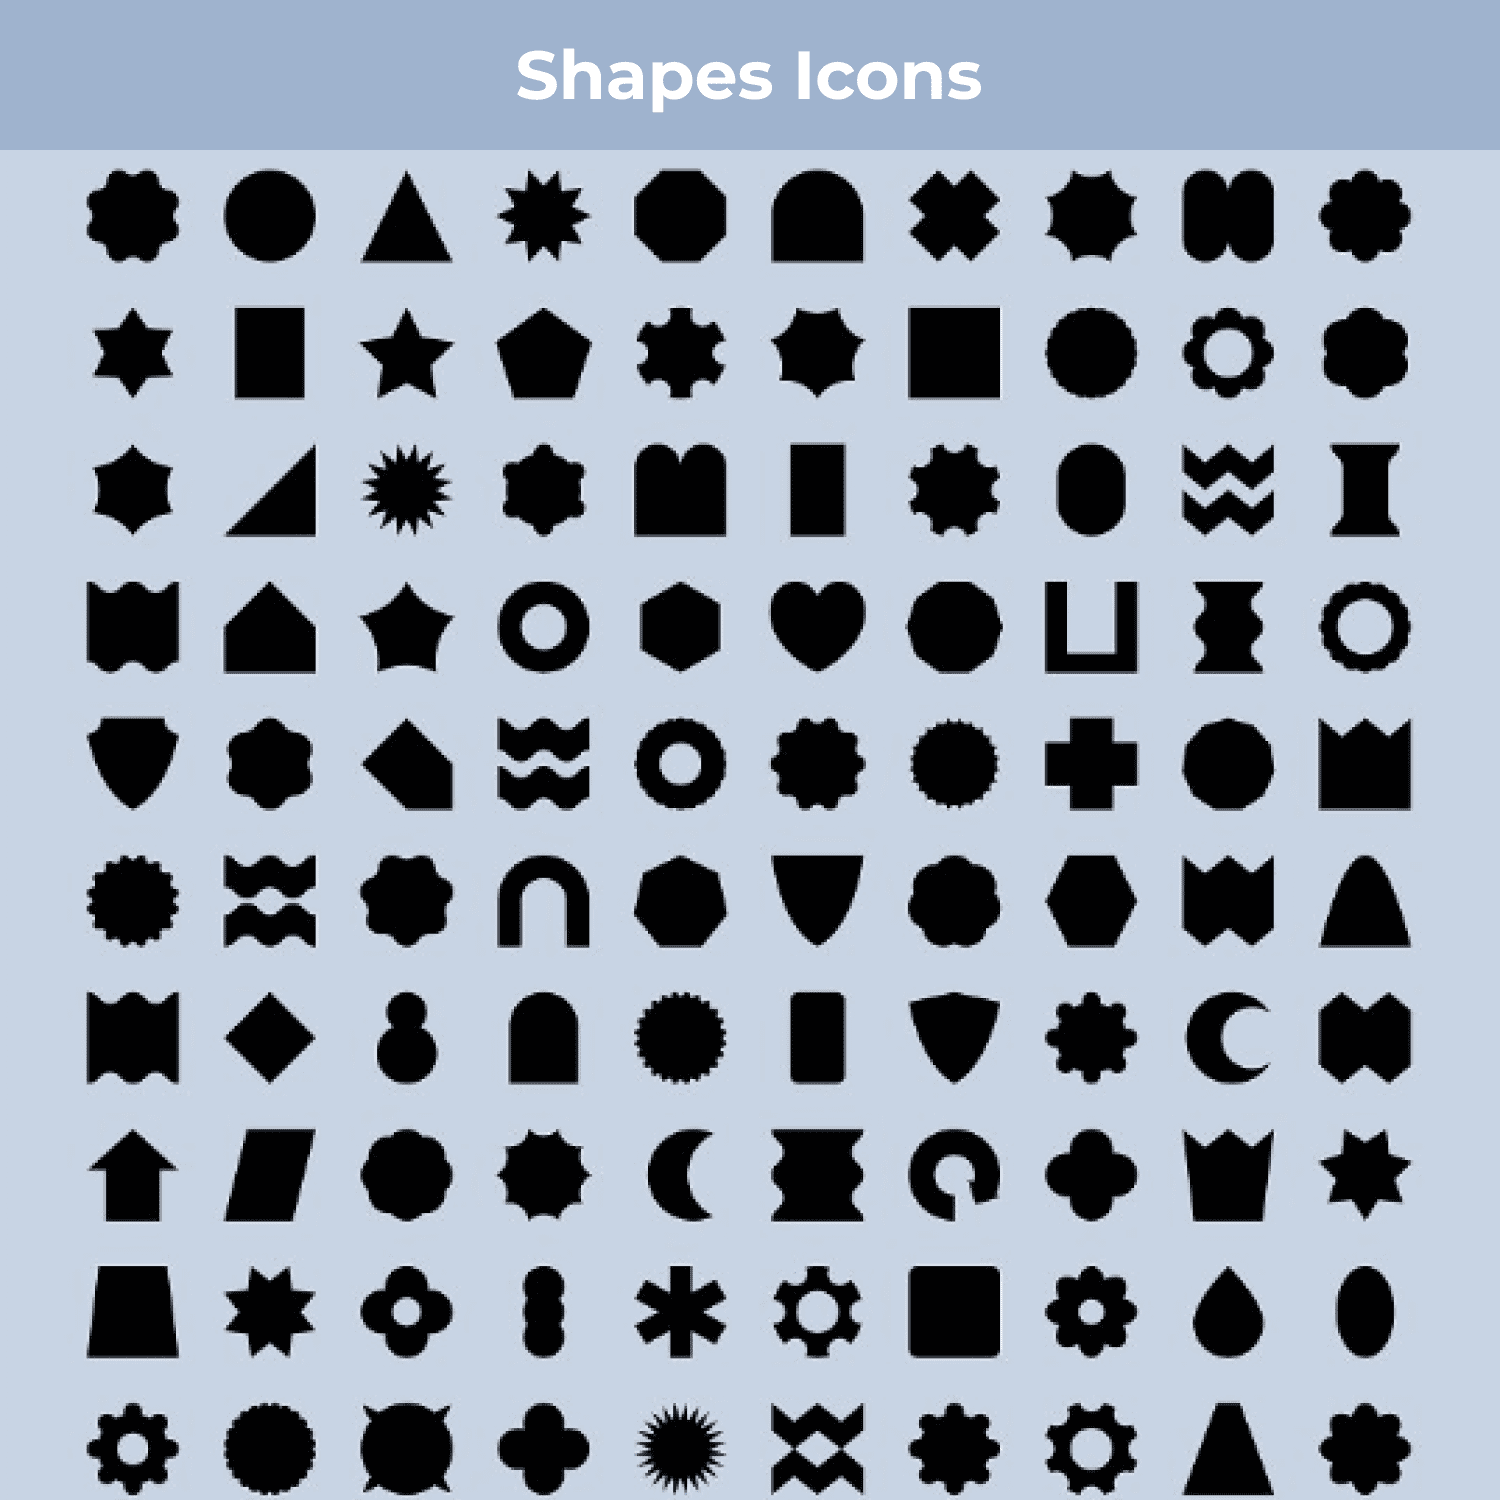 Shapes Icons cover image.